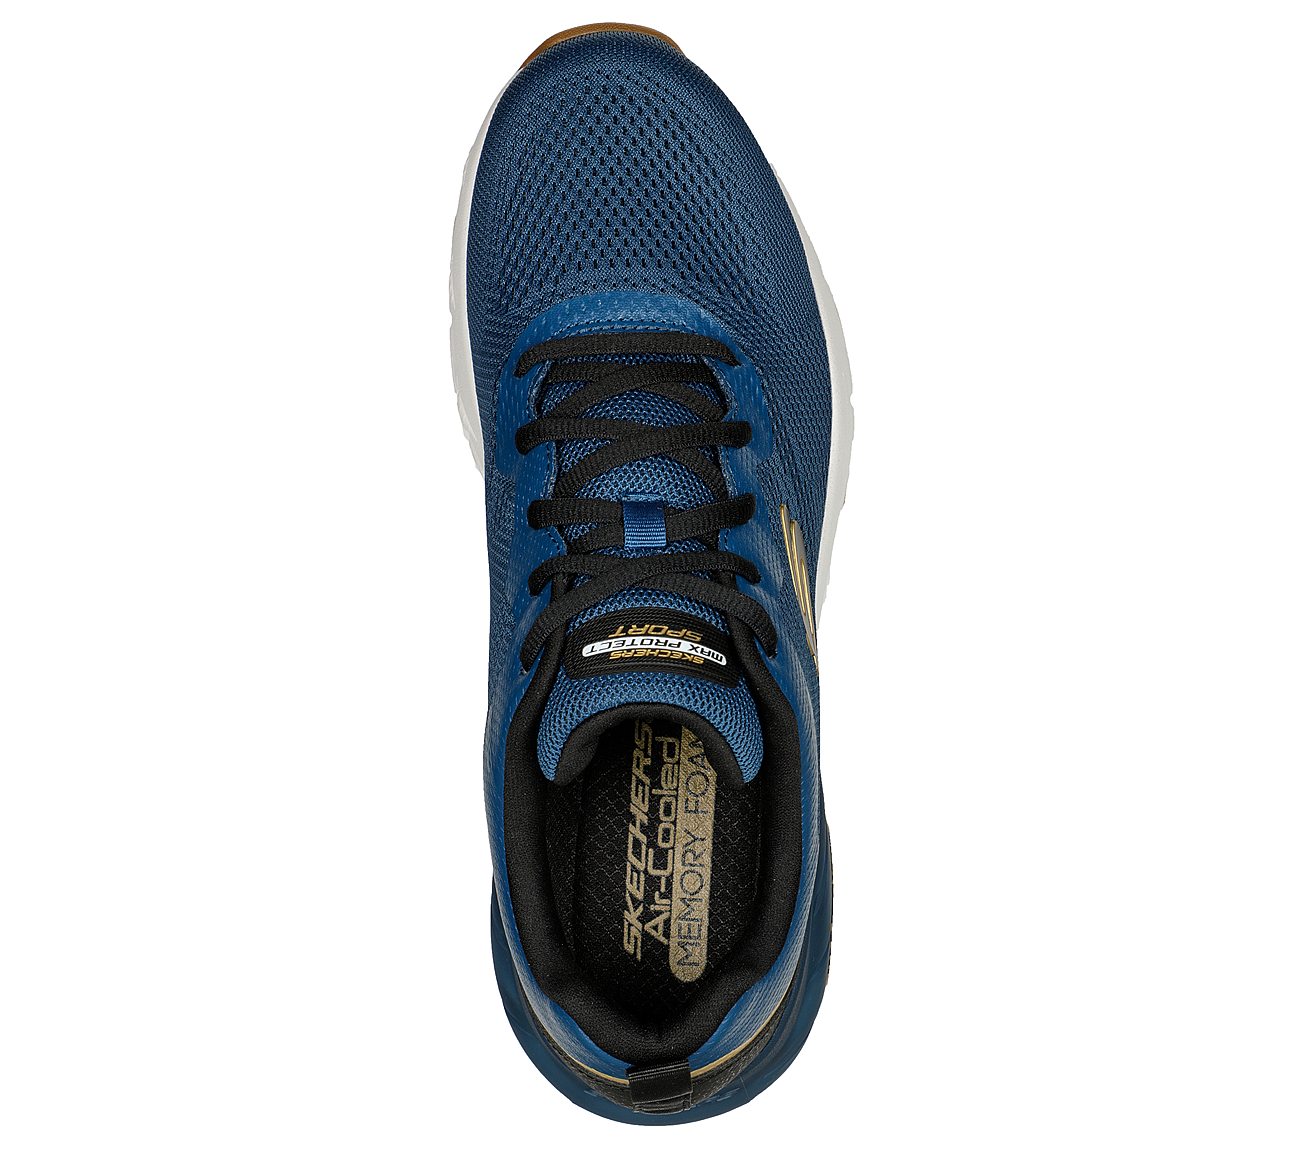 MAX PROTECT SPORT - SAFEGUARD, TEAL Footwear Top View